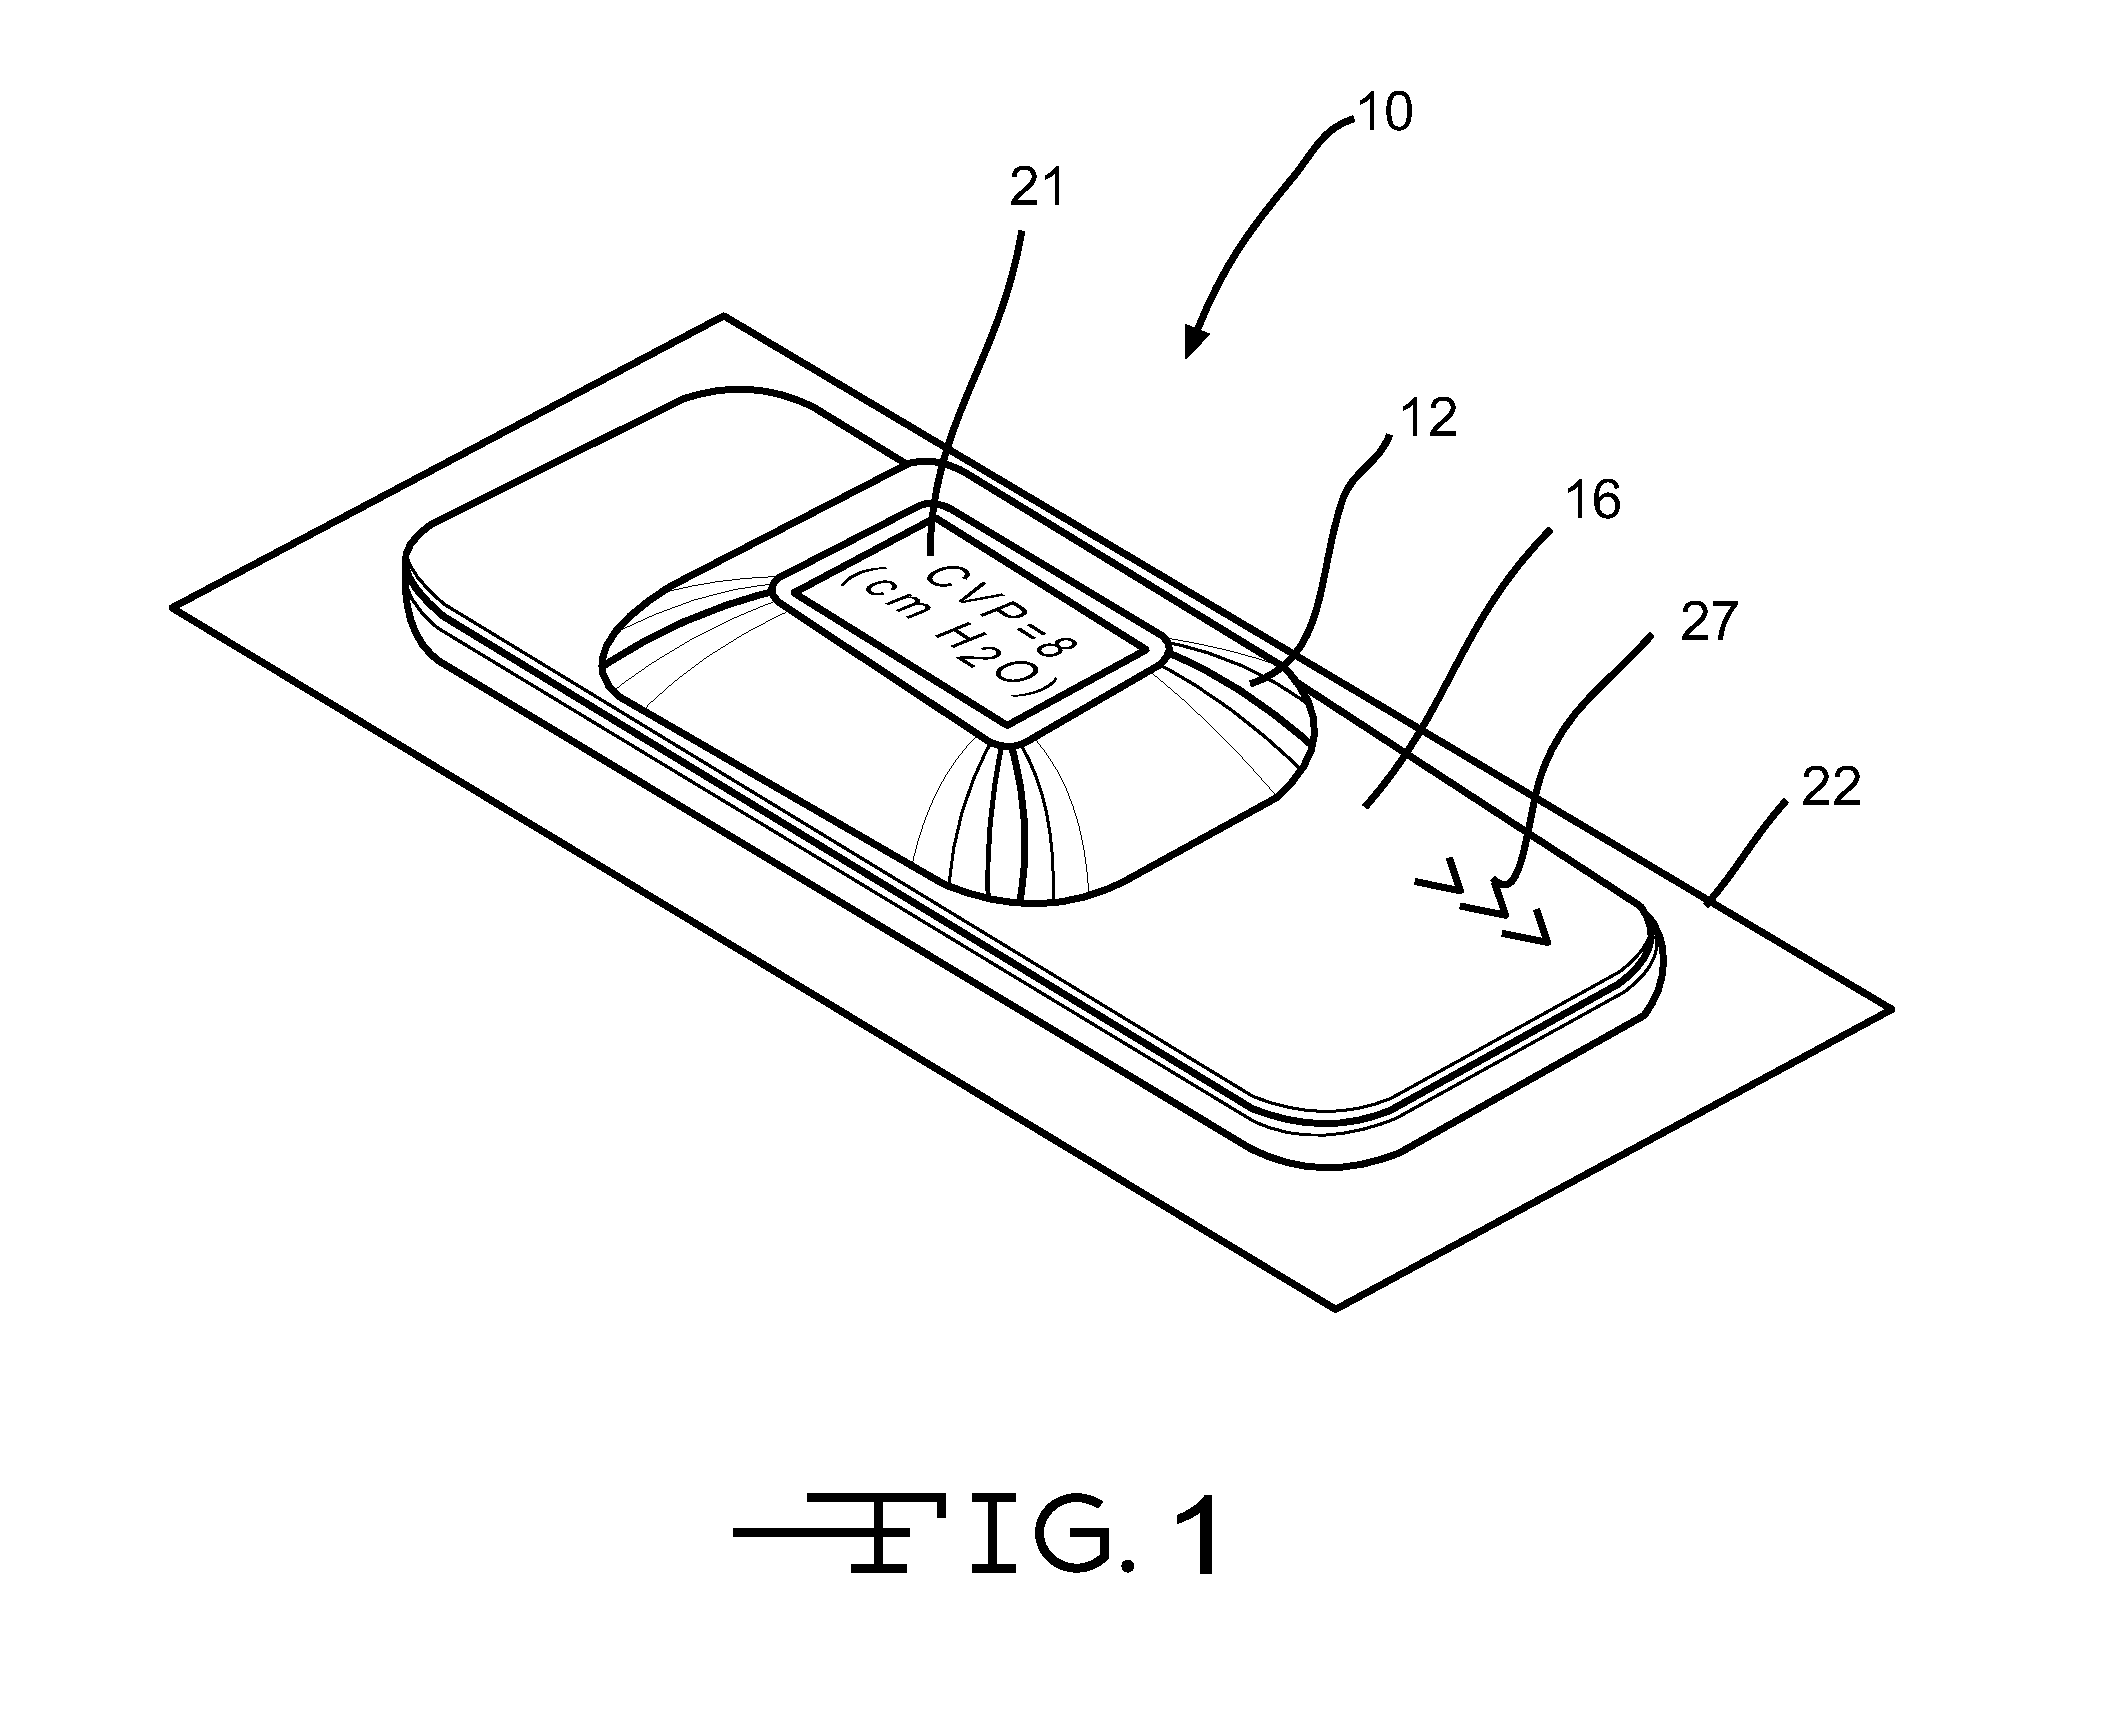 Ultrasonic monitoring device for measuring physiological parameters of a mammal